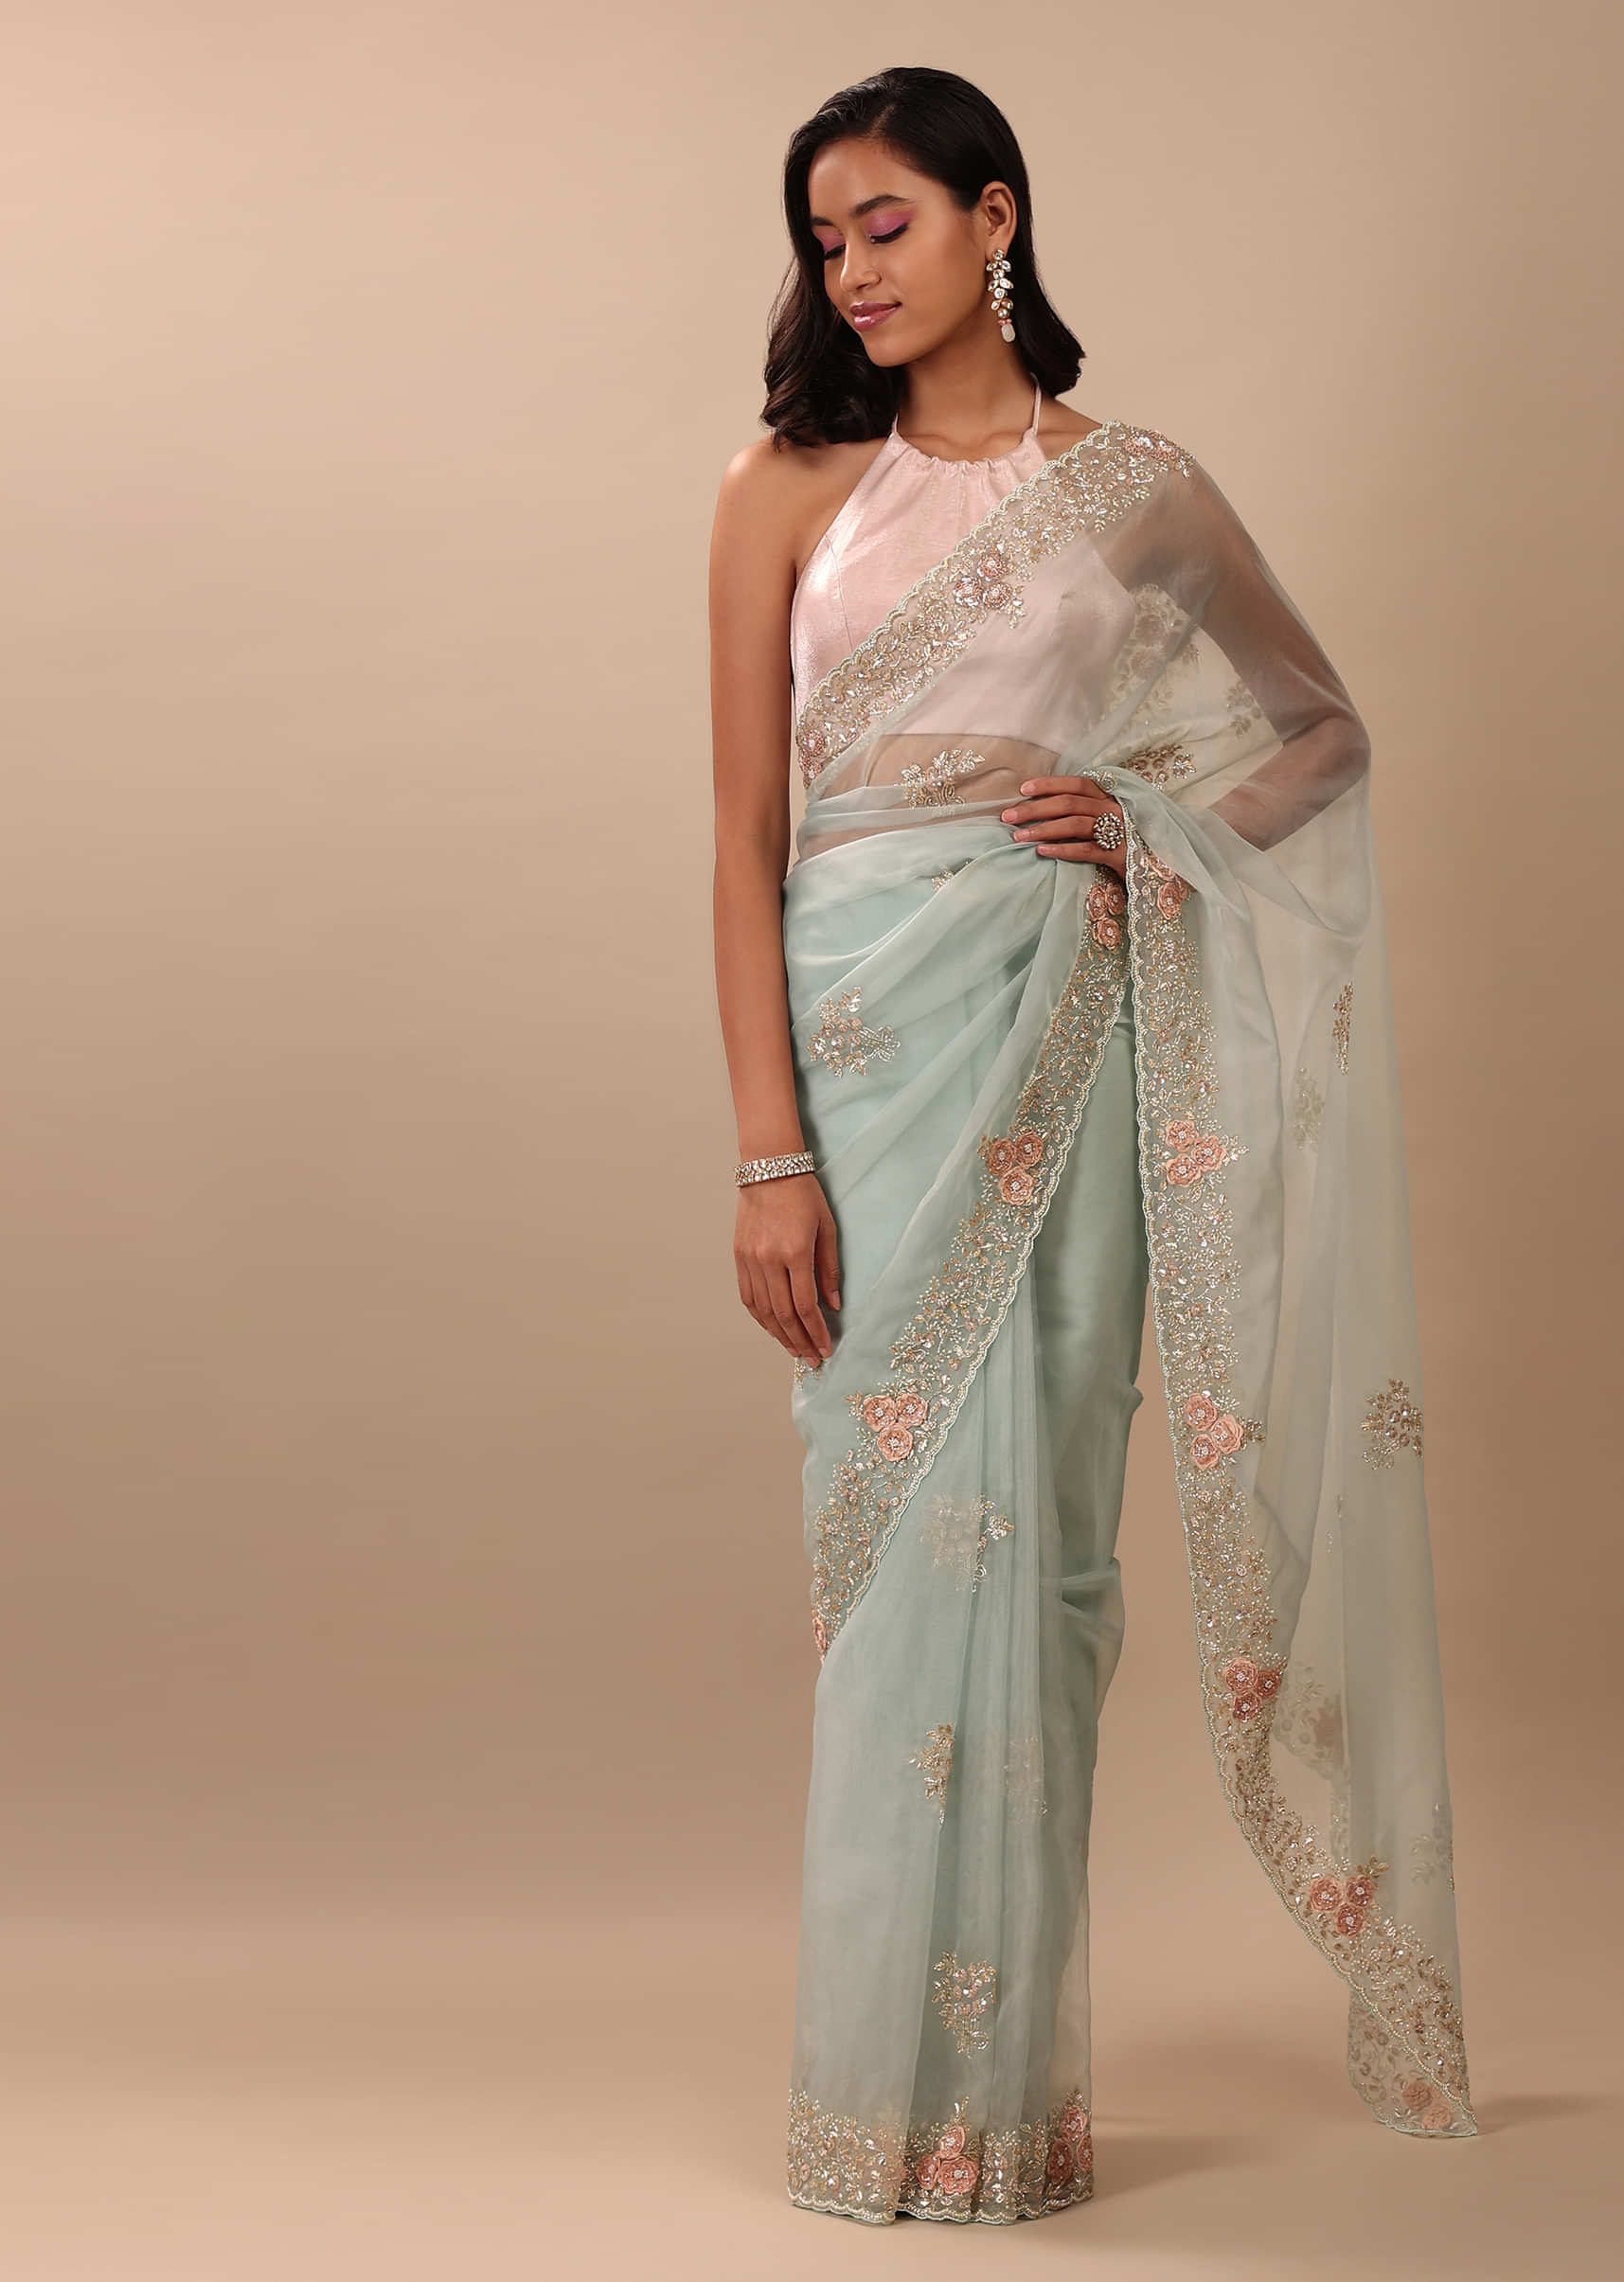 Glacier Blue Saree In Organza With 3D Floral Embroidery In Pearls And Cut Dana